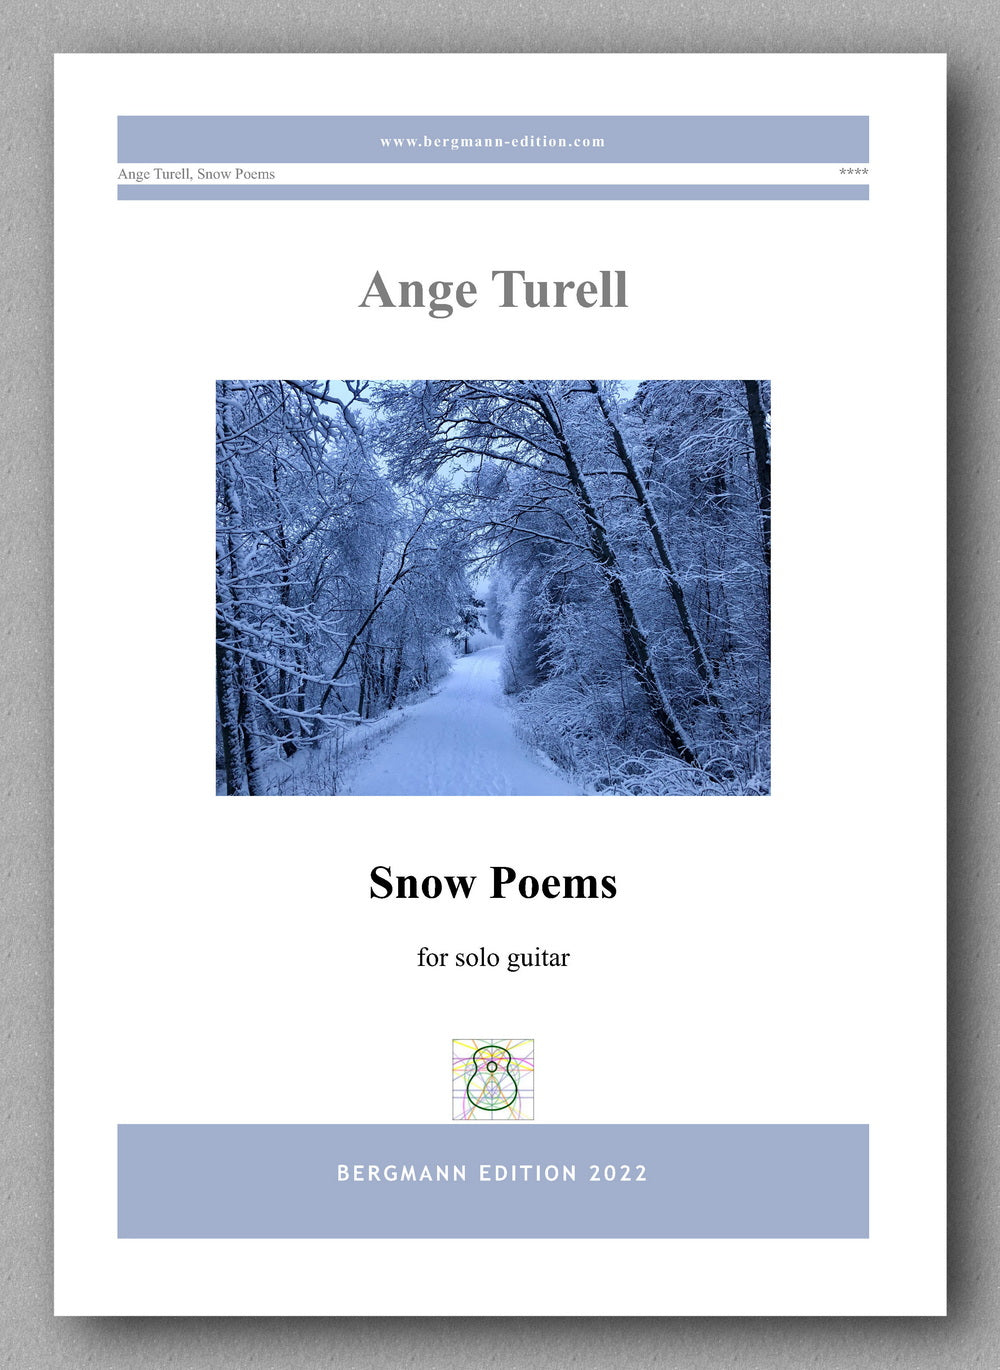 Ange Turell, Snow Poems - preview of the cover